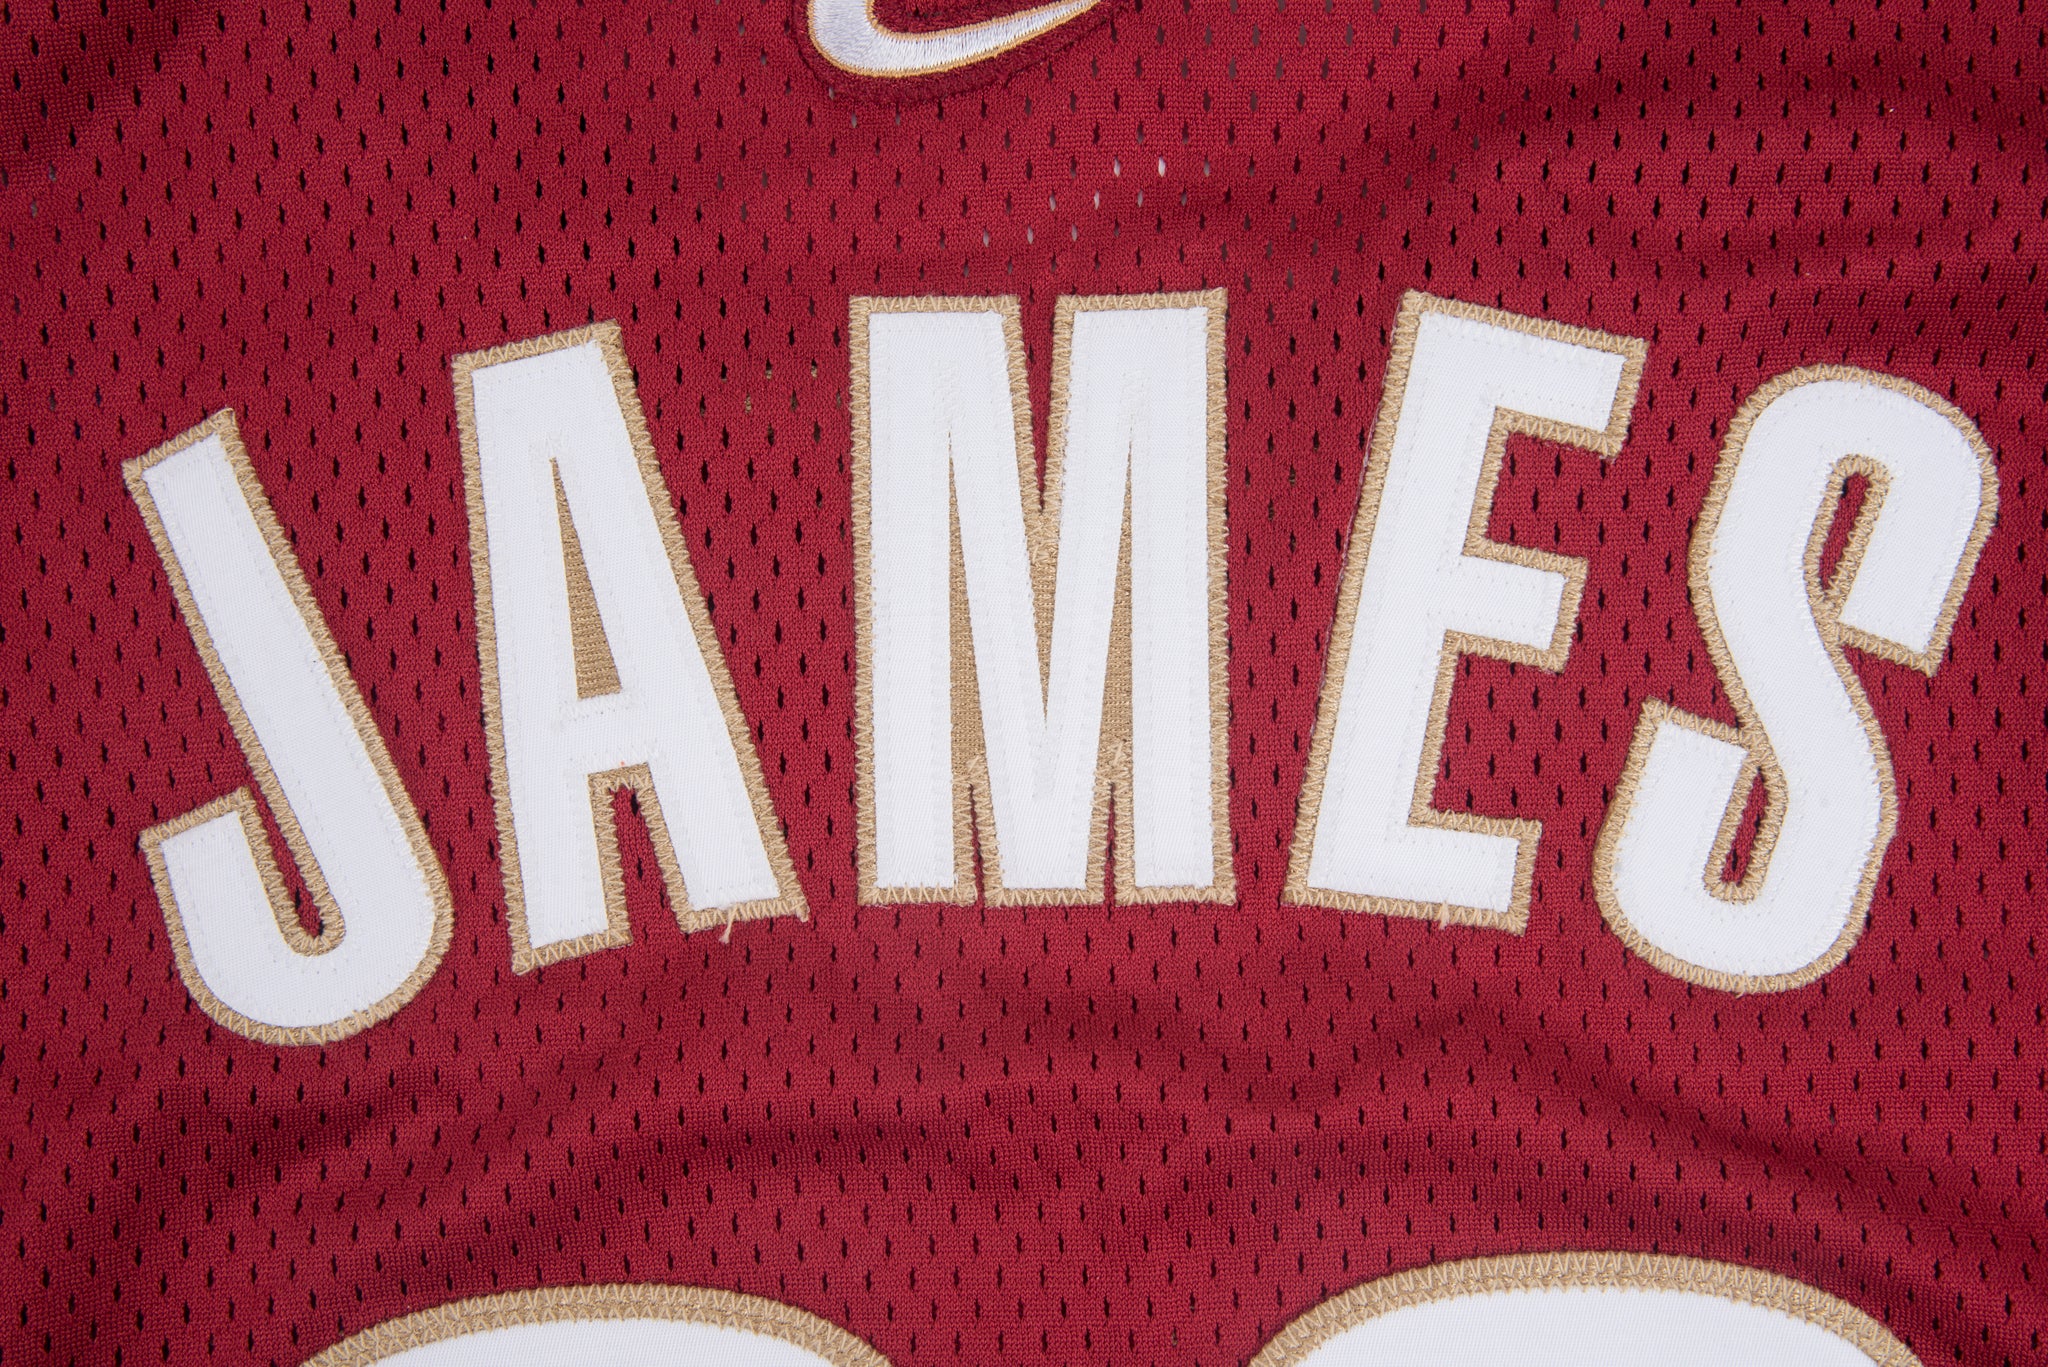 2014-15 LeBron James Game Used Cleveland Cavaliers Road Jersey Photomatched  on 11/14/14 - Double-Double 41 Pts., 11 Reb., & 7 Ast. (MeiGray), Sotheby's & Goldin Auctions Present: A Century of Champions, 2020